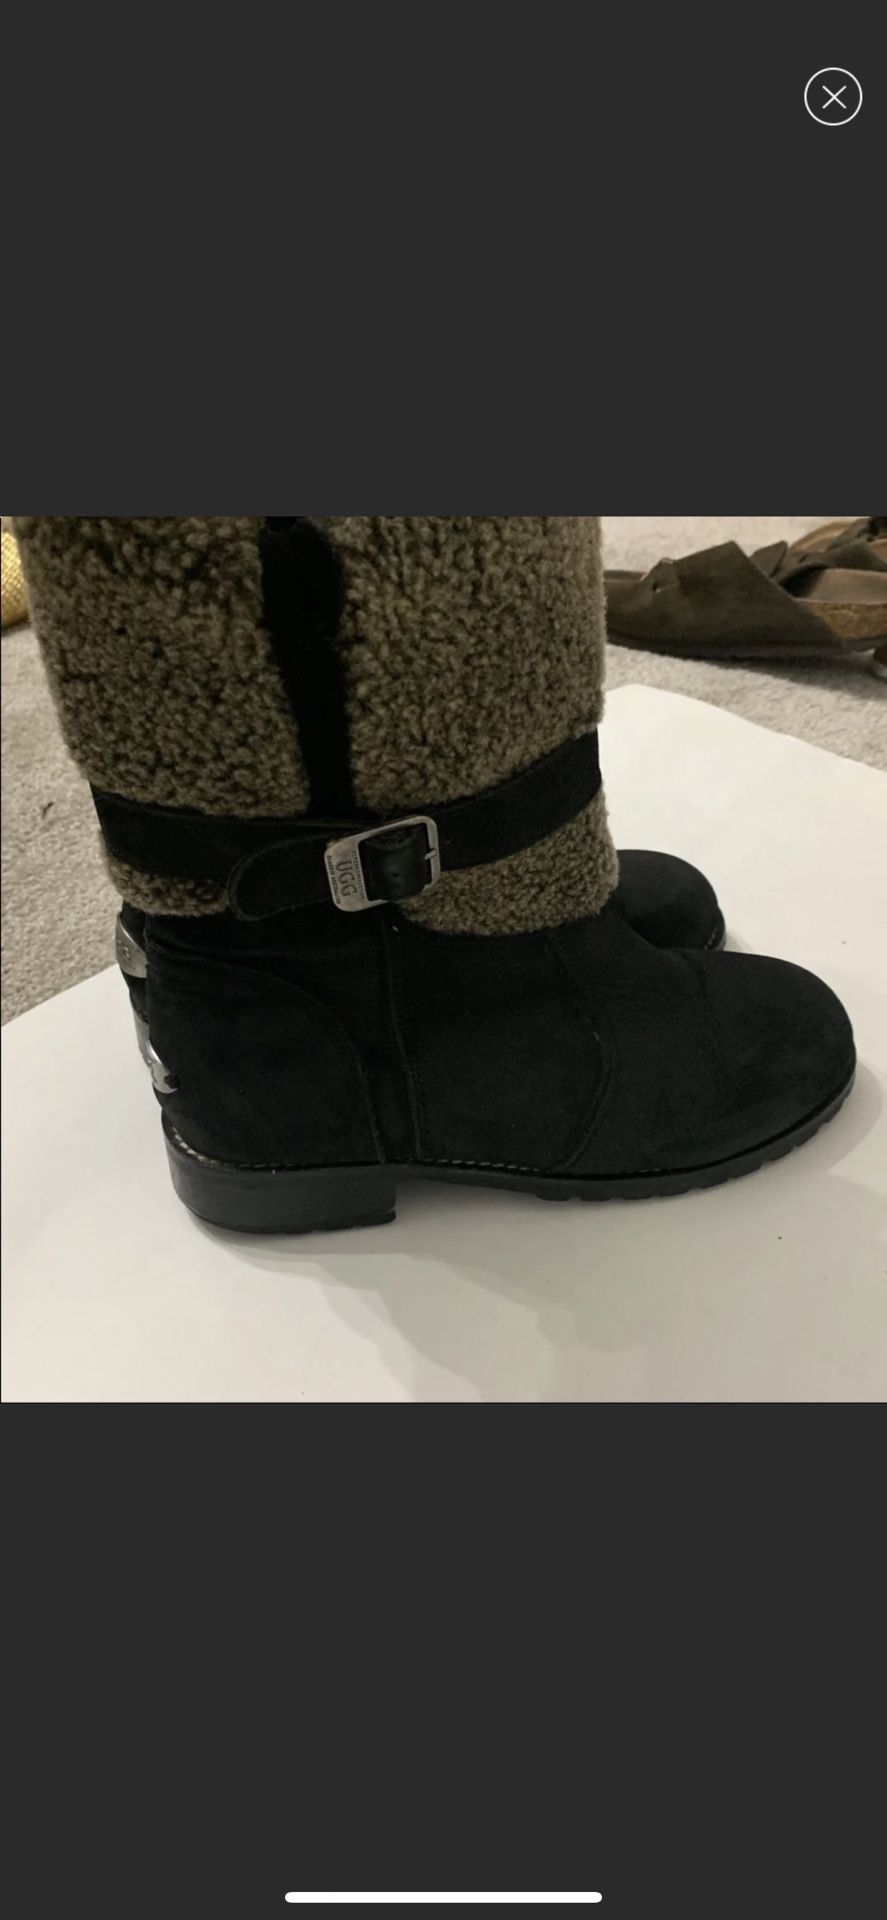 Ugg woman’s boots size 6”